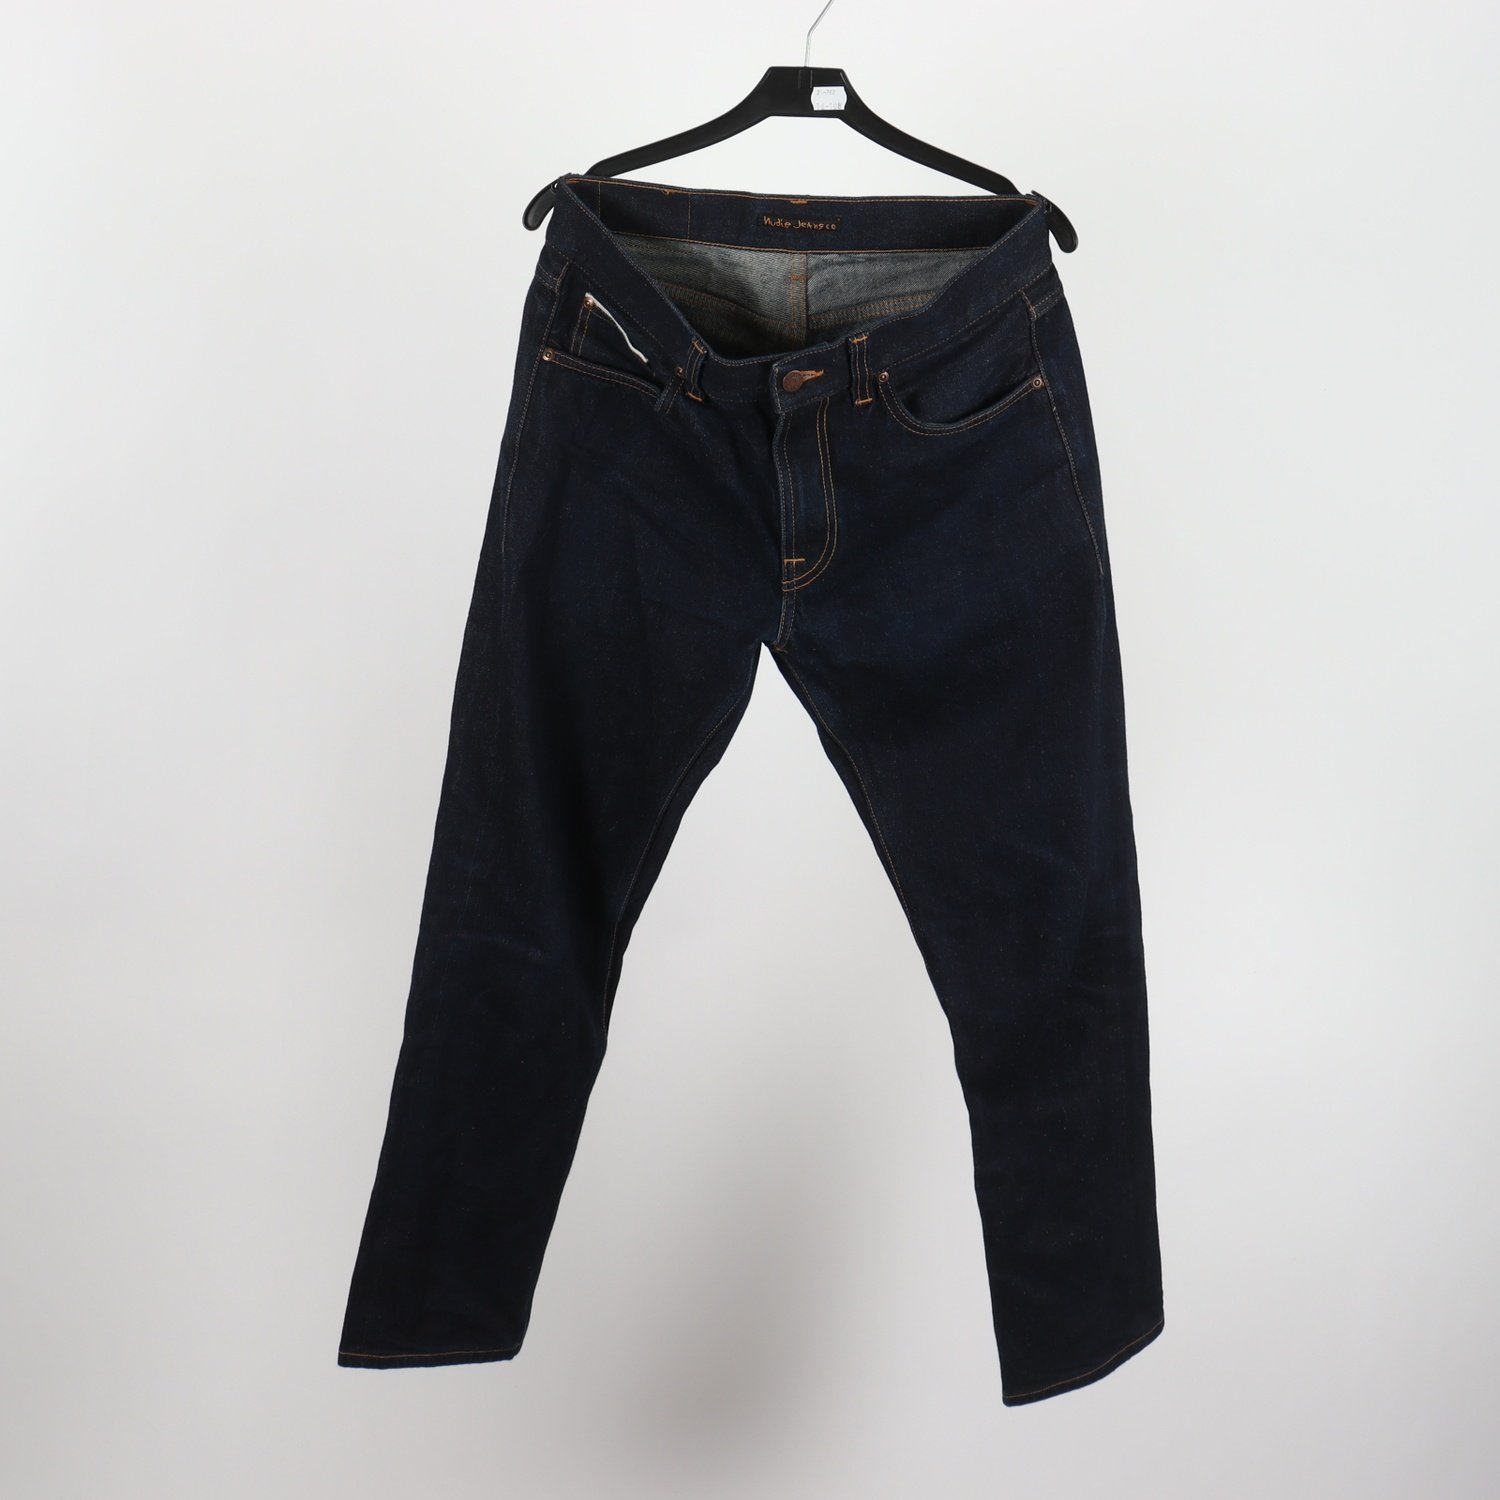 Jeans, Nudie Jeans, Gritty Jackson Dry Maze Selvage, stl. 30/32